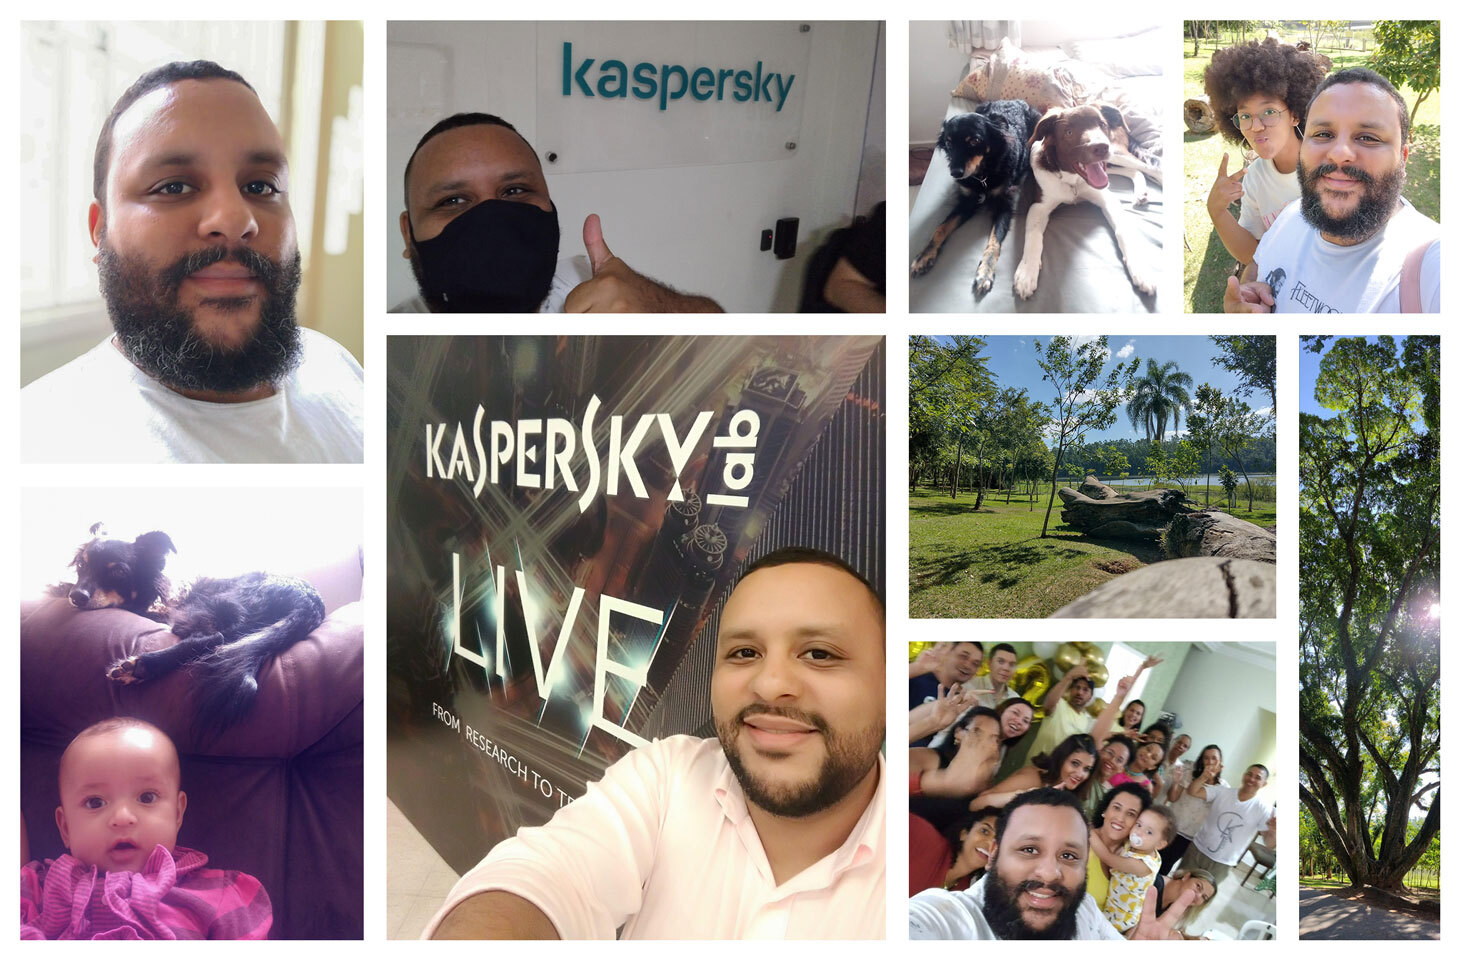 Meet Valter Generoso, Technical Account Manager at Kaspersky Latin America